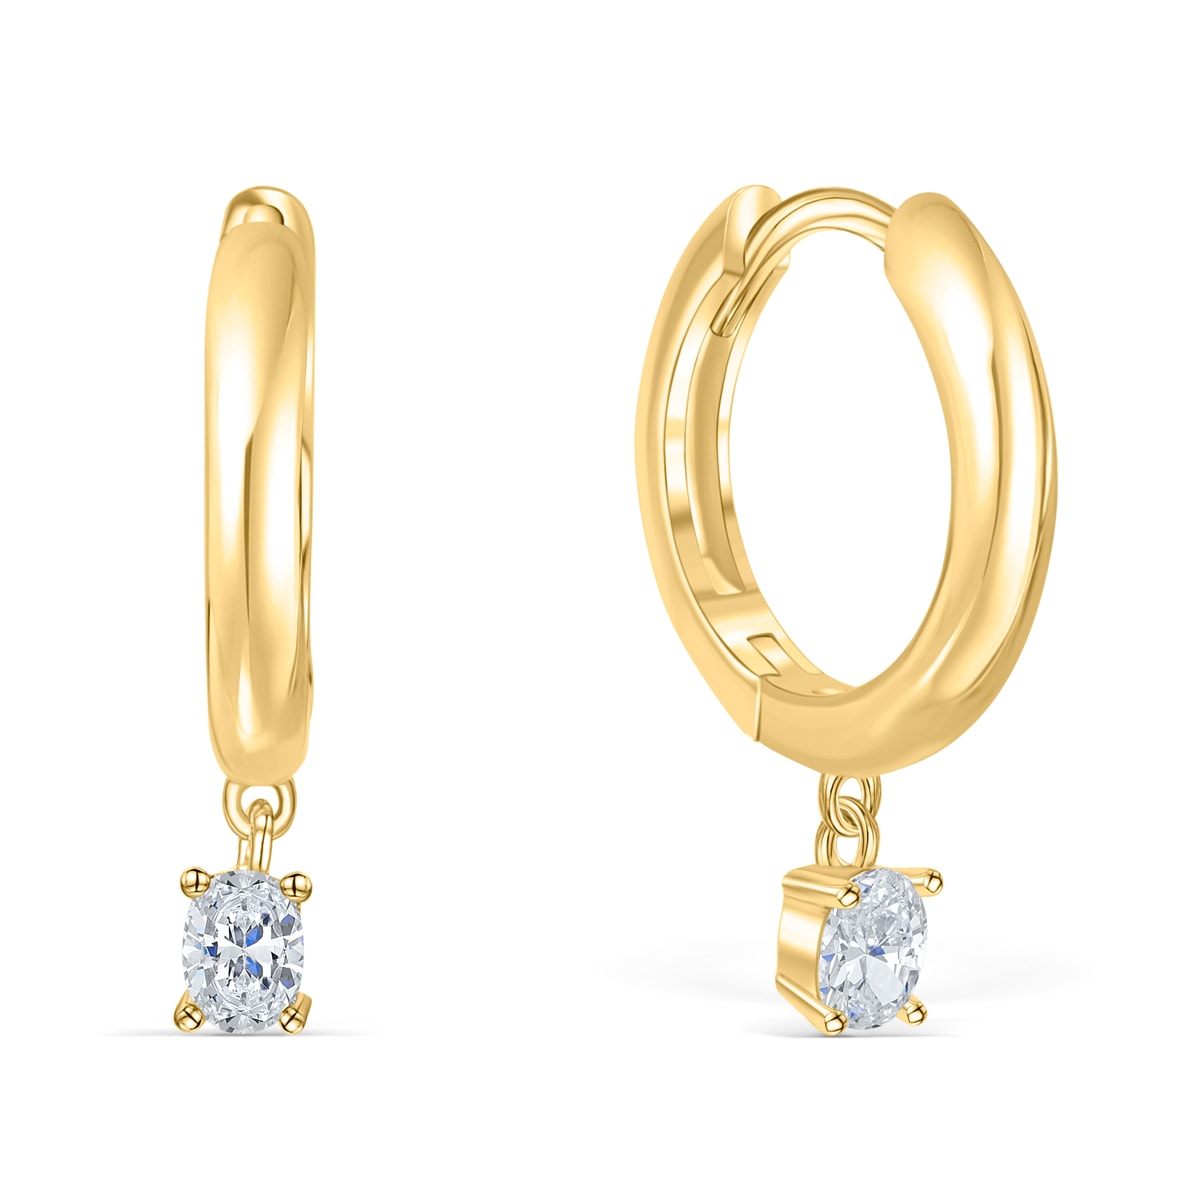 Gold hoop earrings with stone